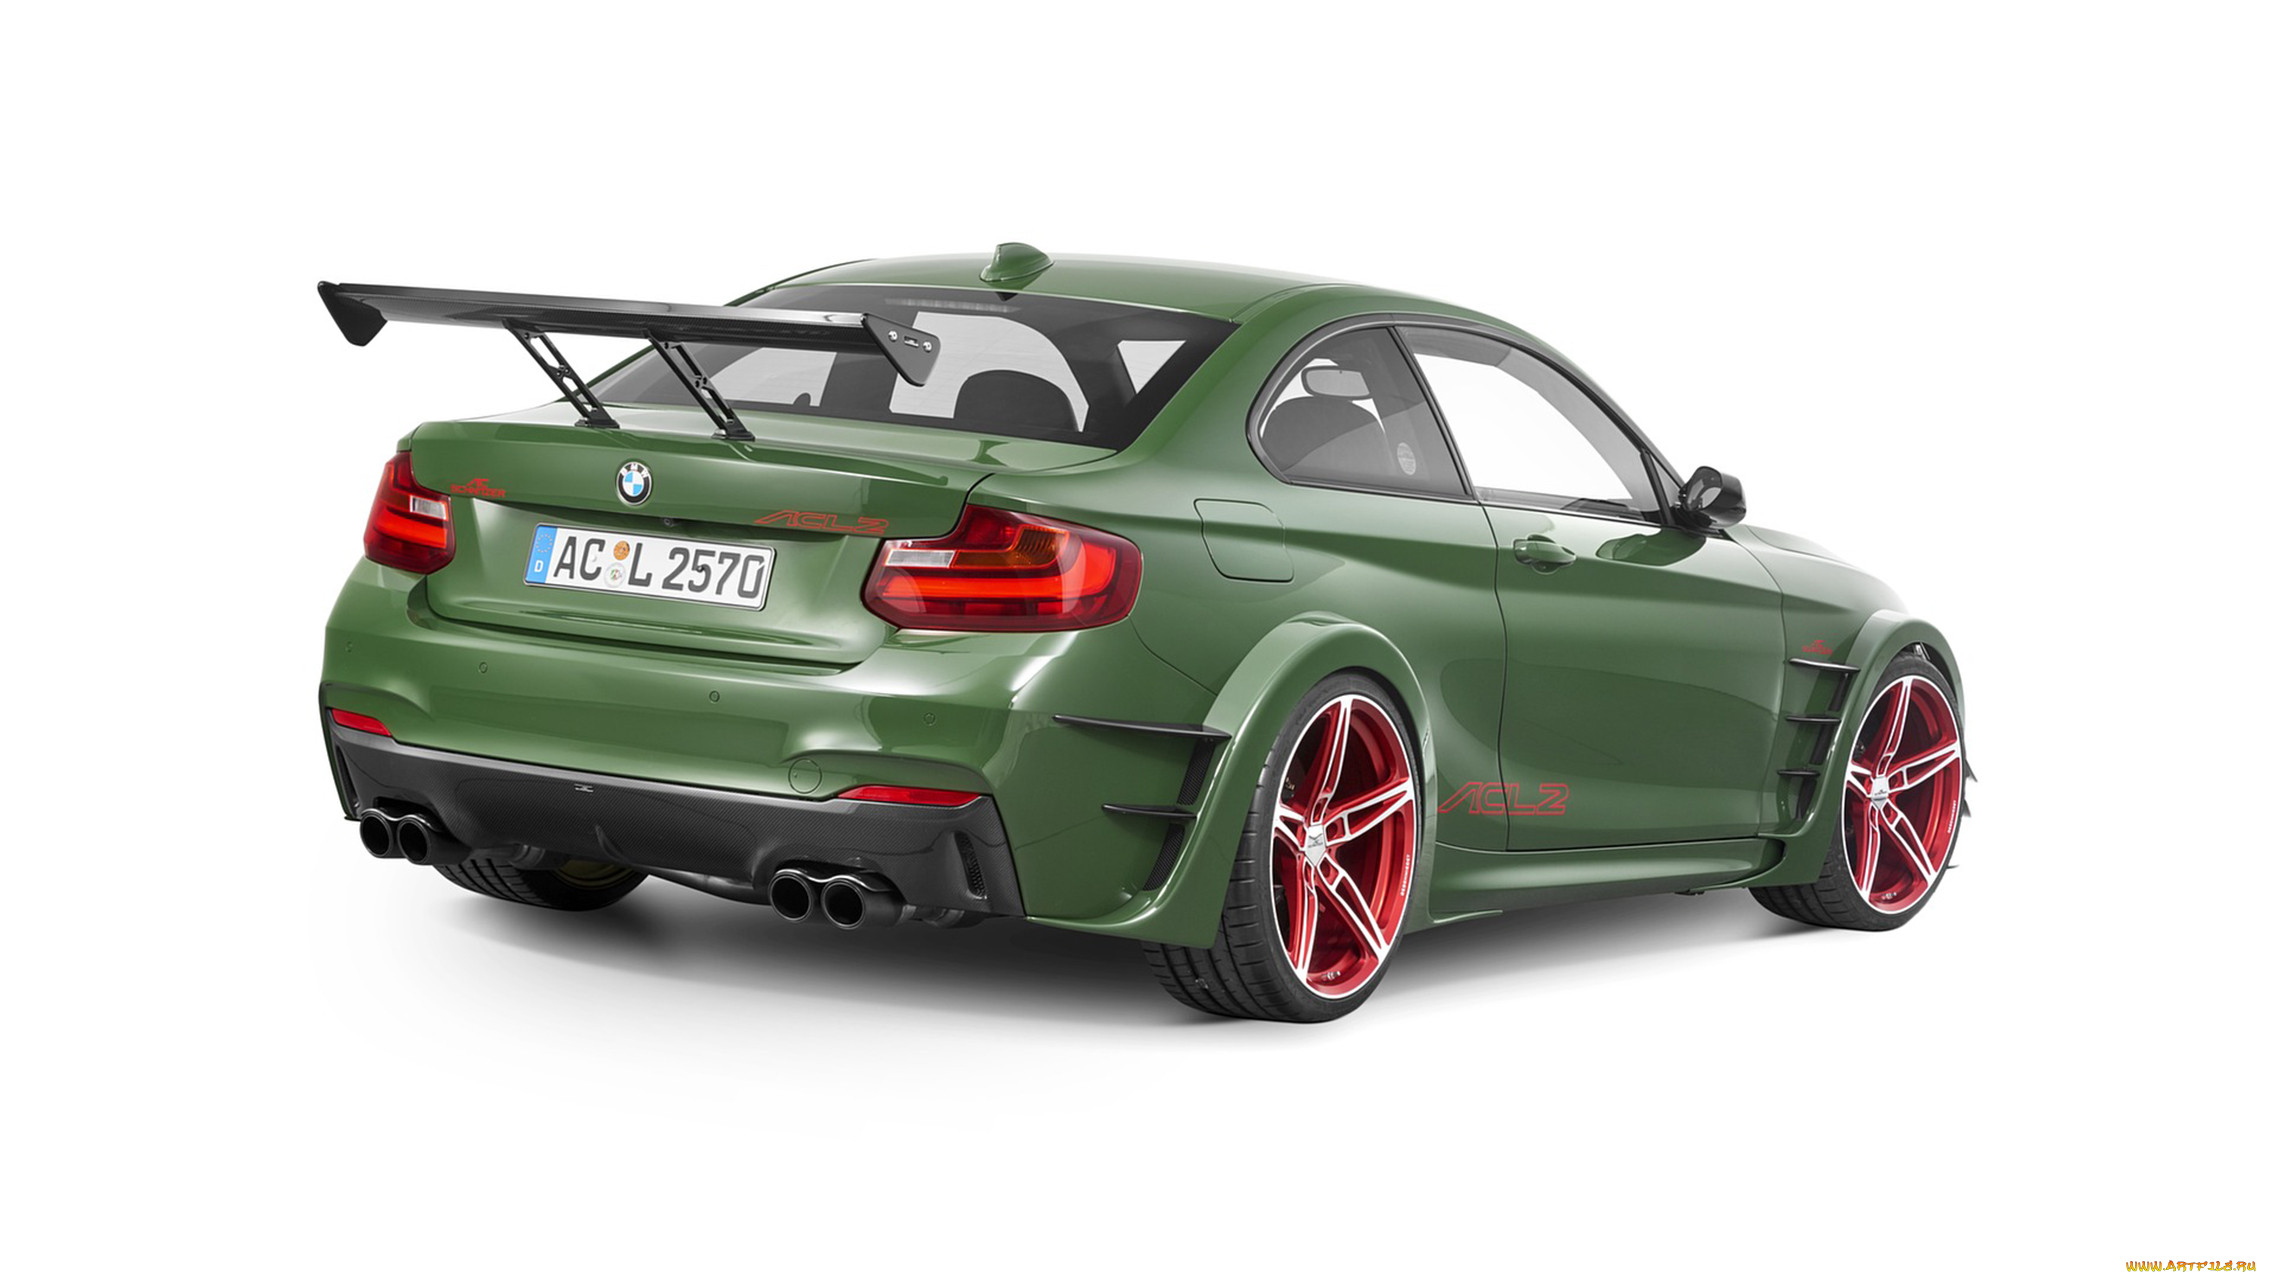 ac schnitzer acl2 concept based on the bmw m-235i coupe 2016, , bmw, ac, schnitzer, m-235i, coupe, 2016, concept, based, acl2